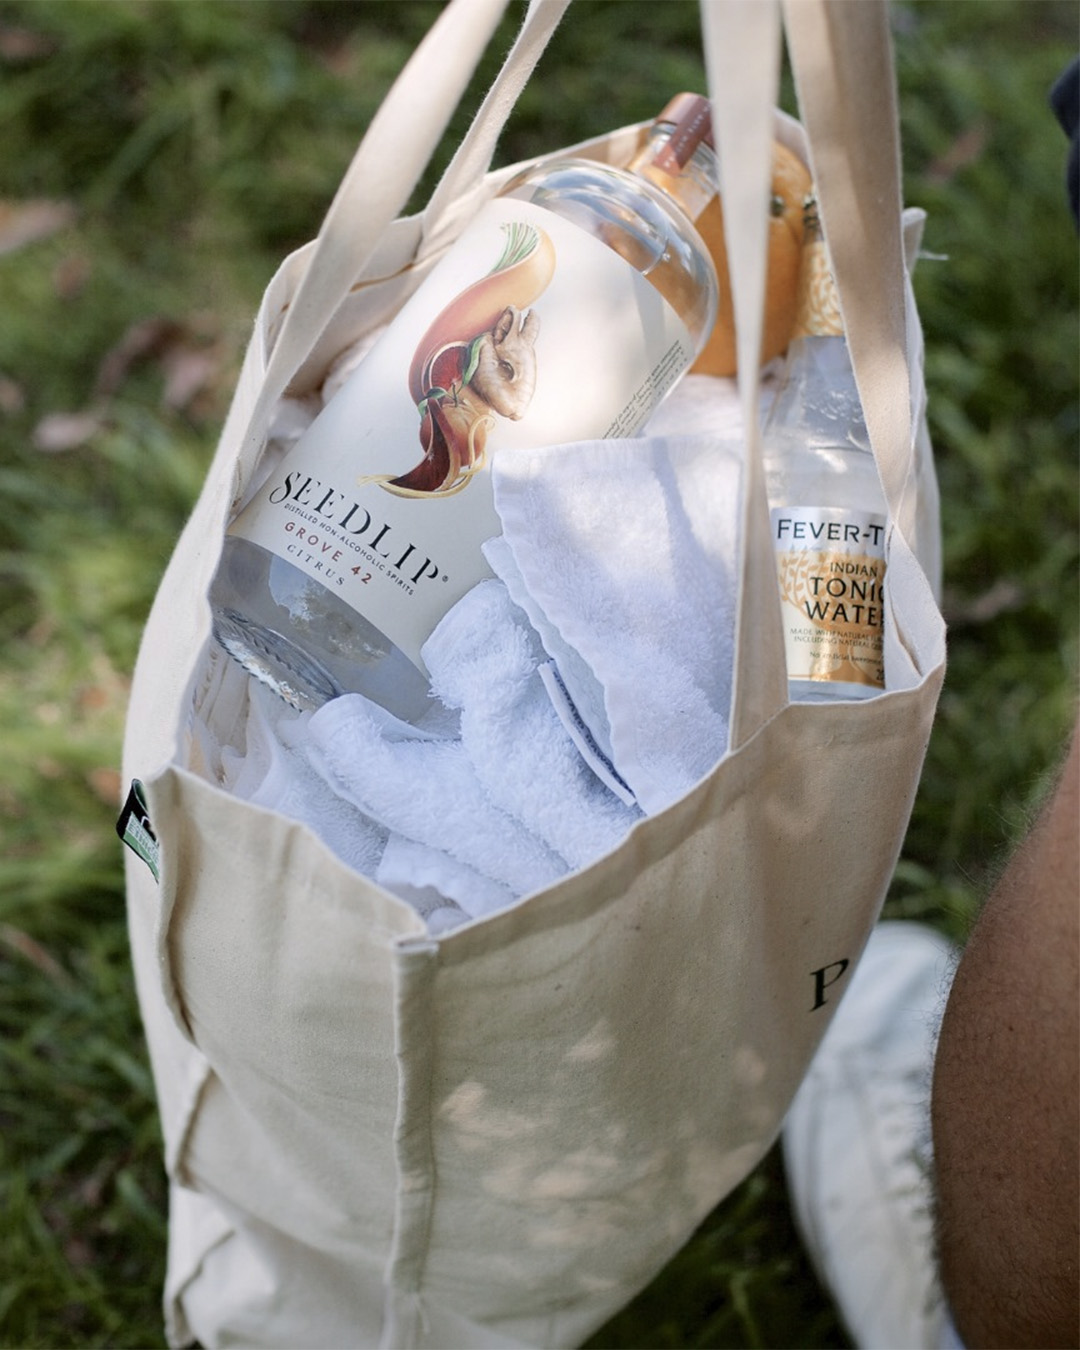 Someone heads out with Seedlip and Fever Tree tonic stashed in his bag.